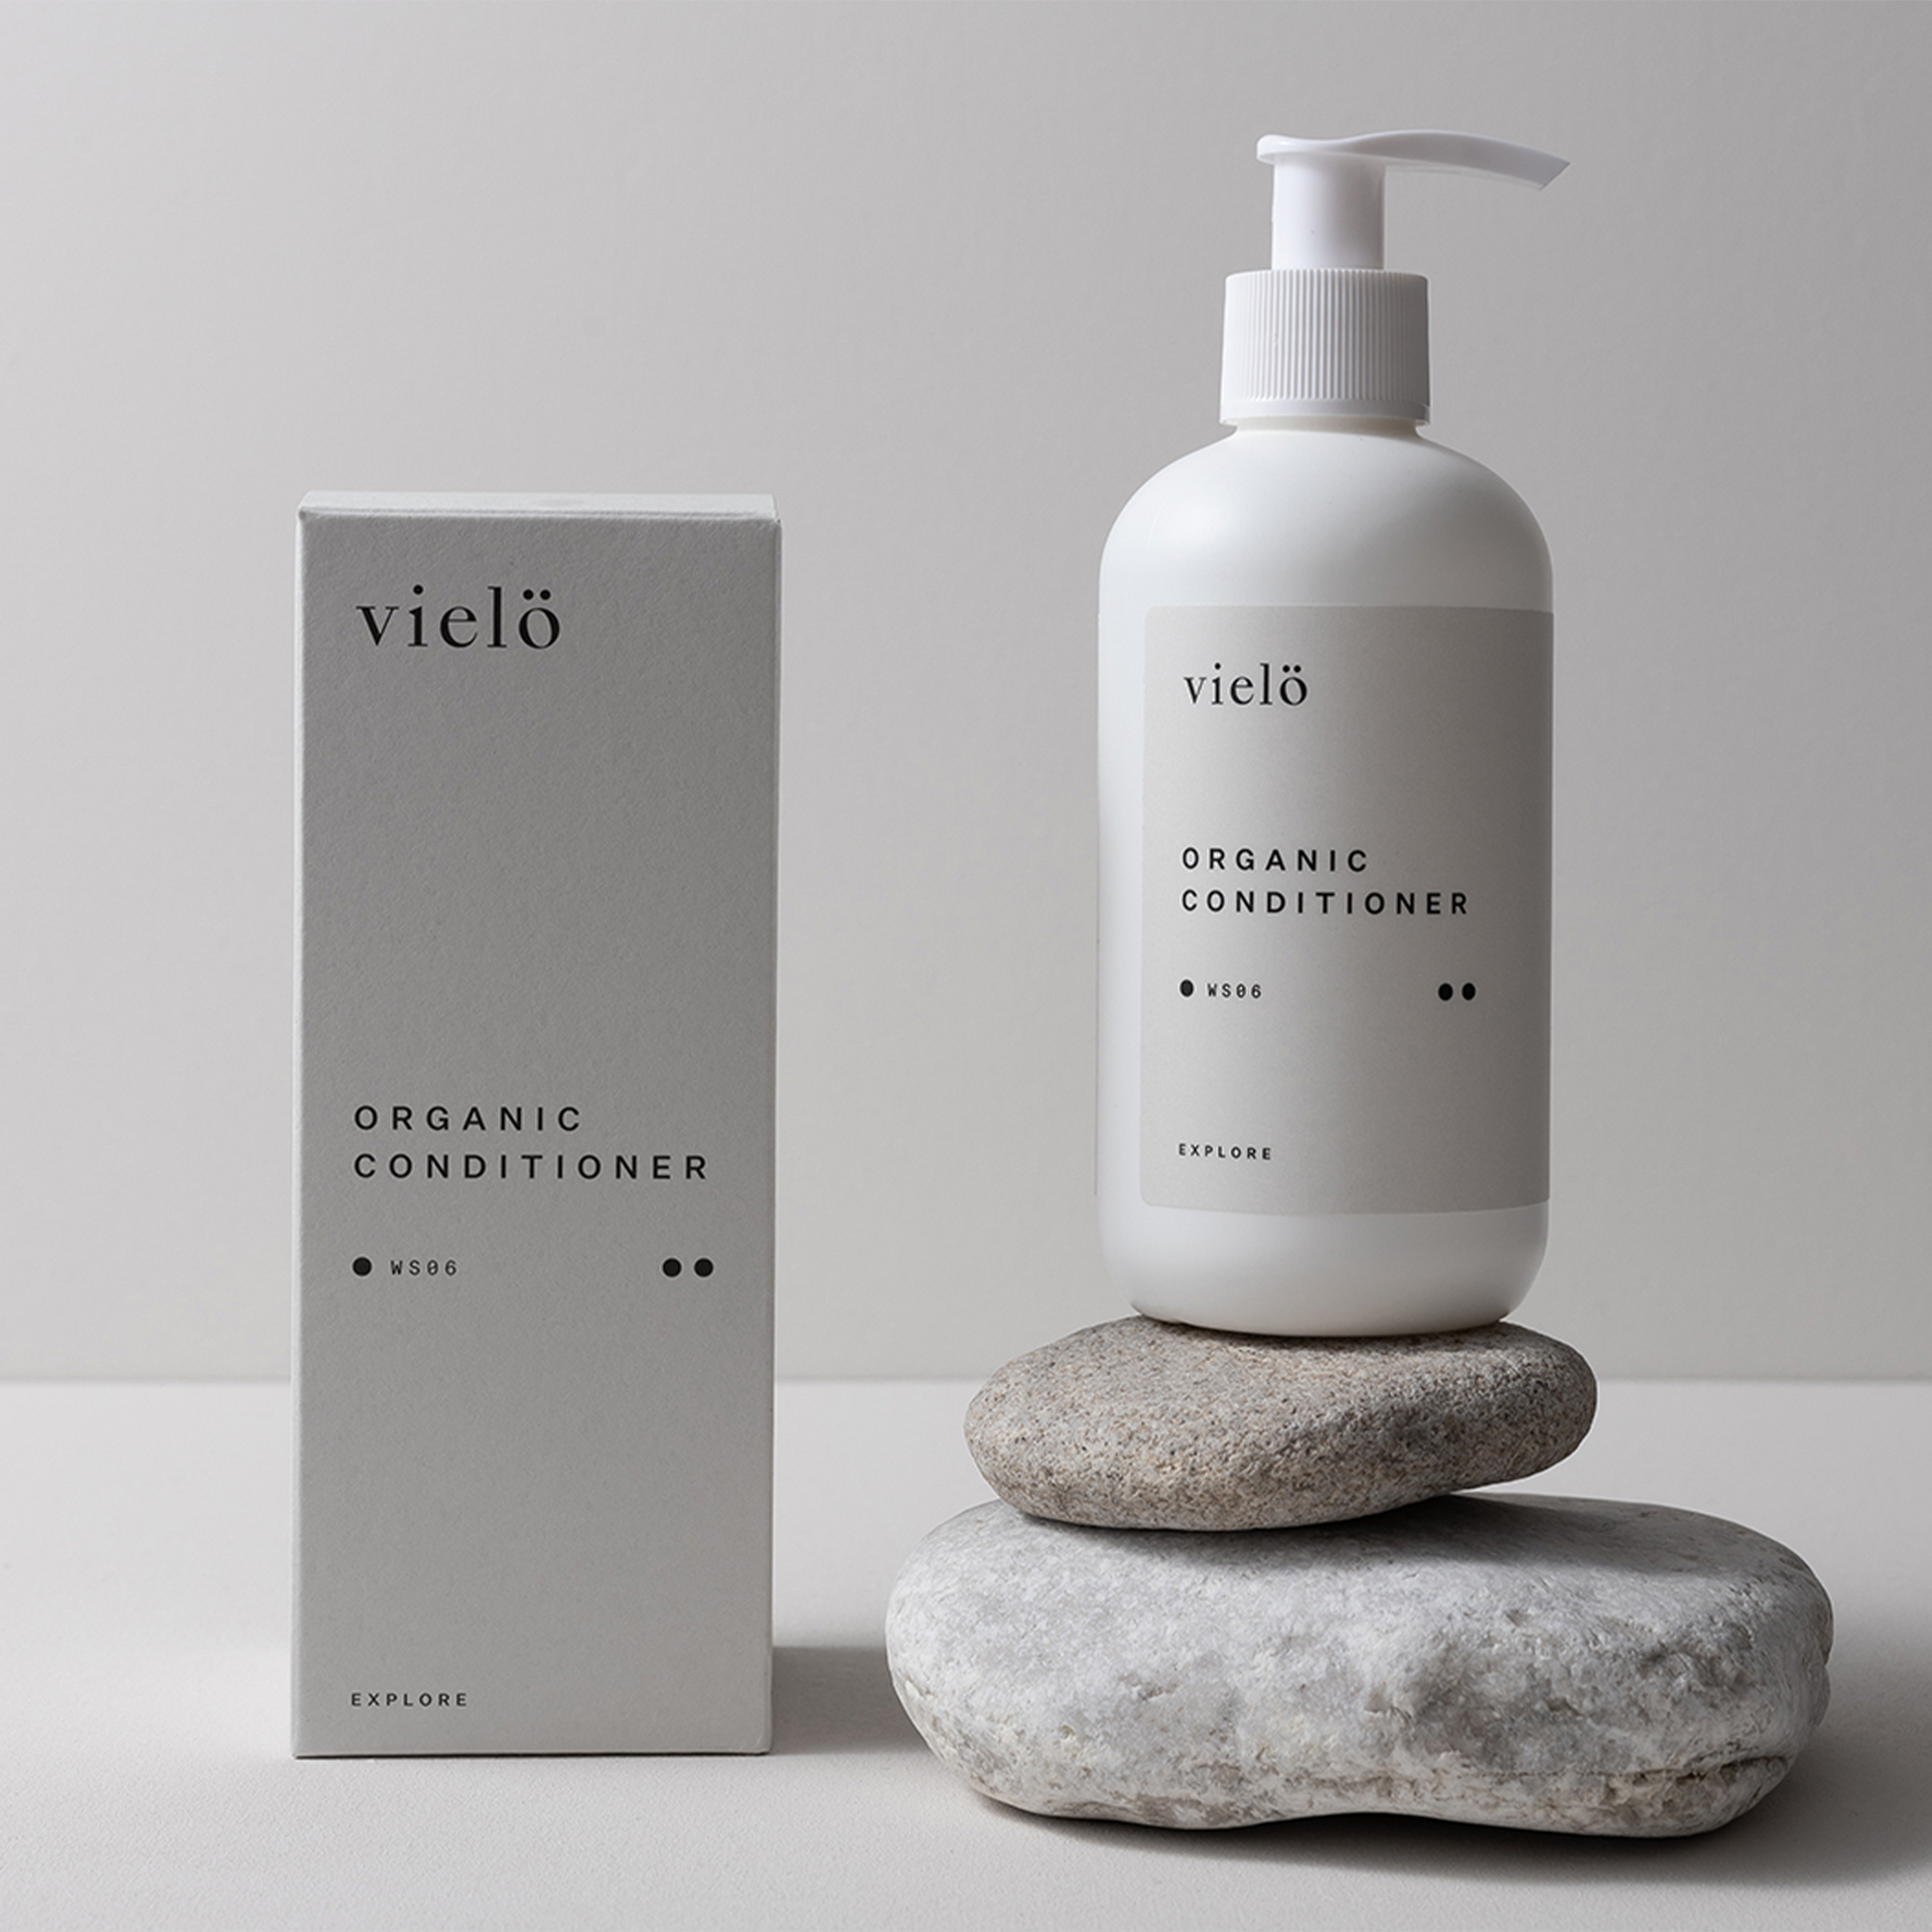 Vielo Organic Conditioner: Nourishing organic conditioner, specially designed to strengthen and moisturize damaged hair, leaving it soft and smooth. Suitable for all hair types.